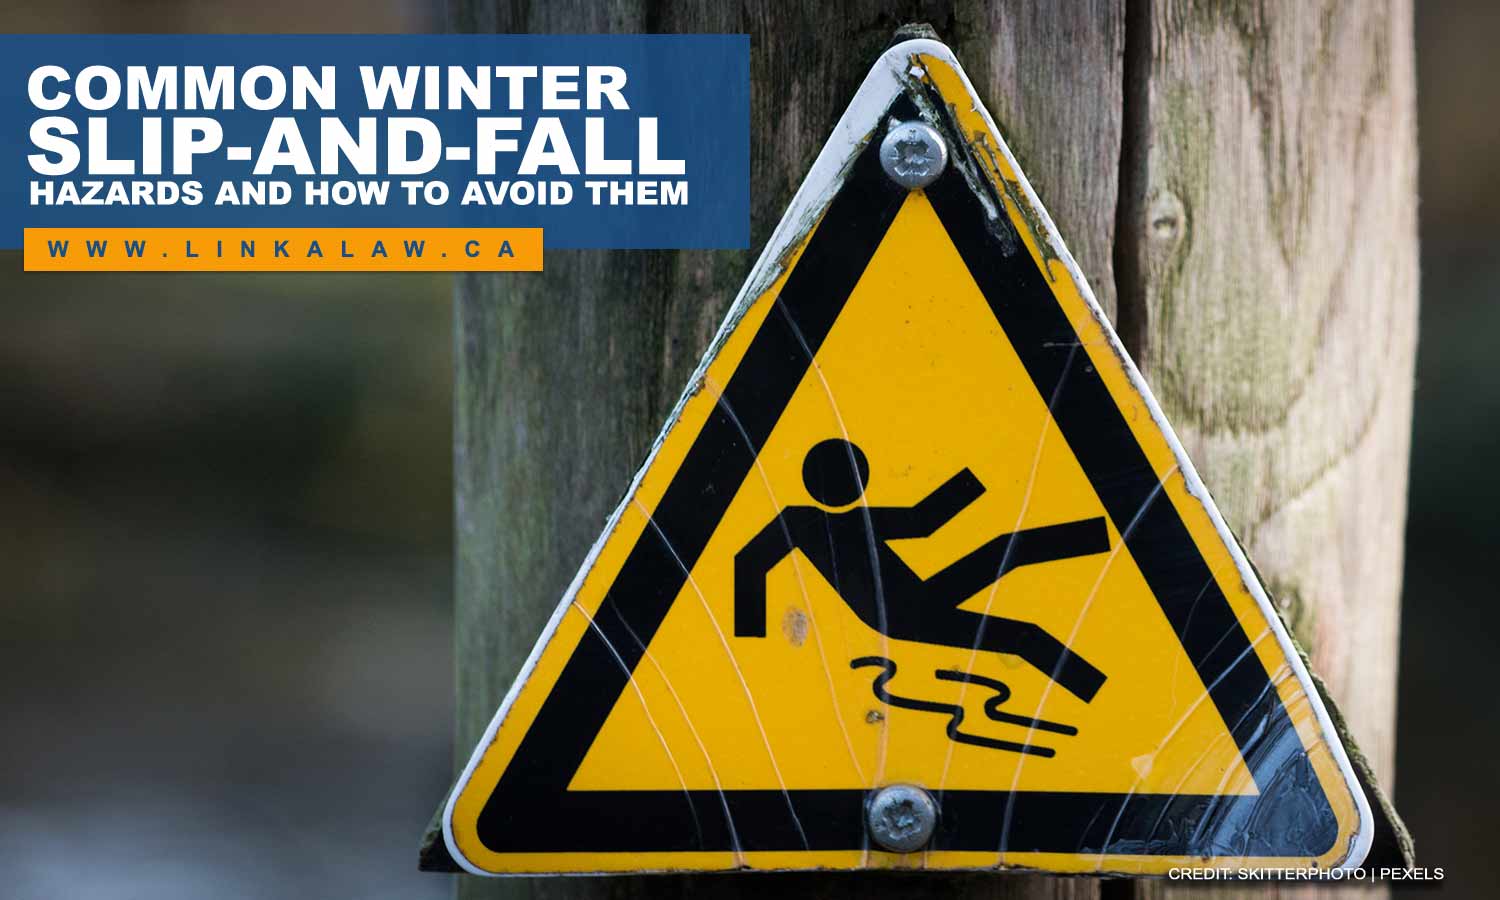 Common Winter Slip-and-fall Hazards And How To Avoid Them